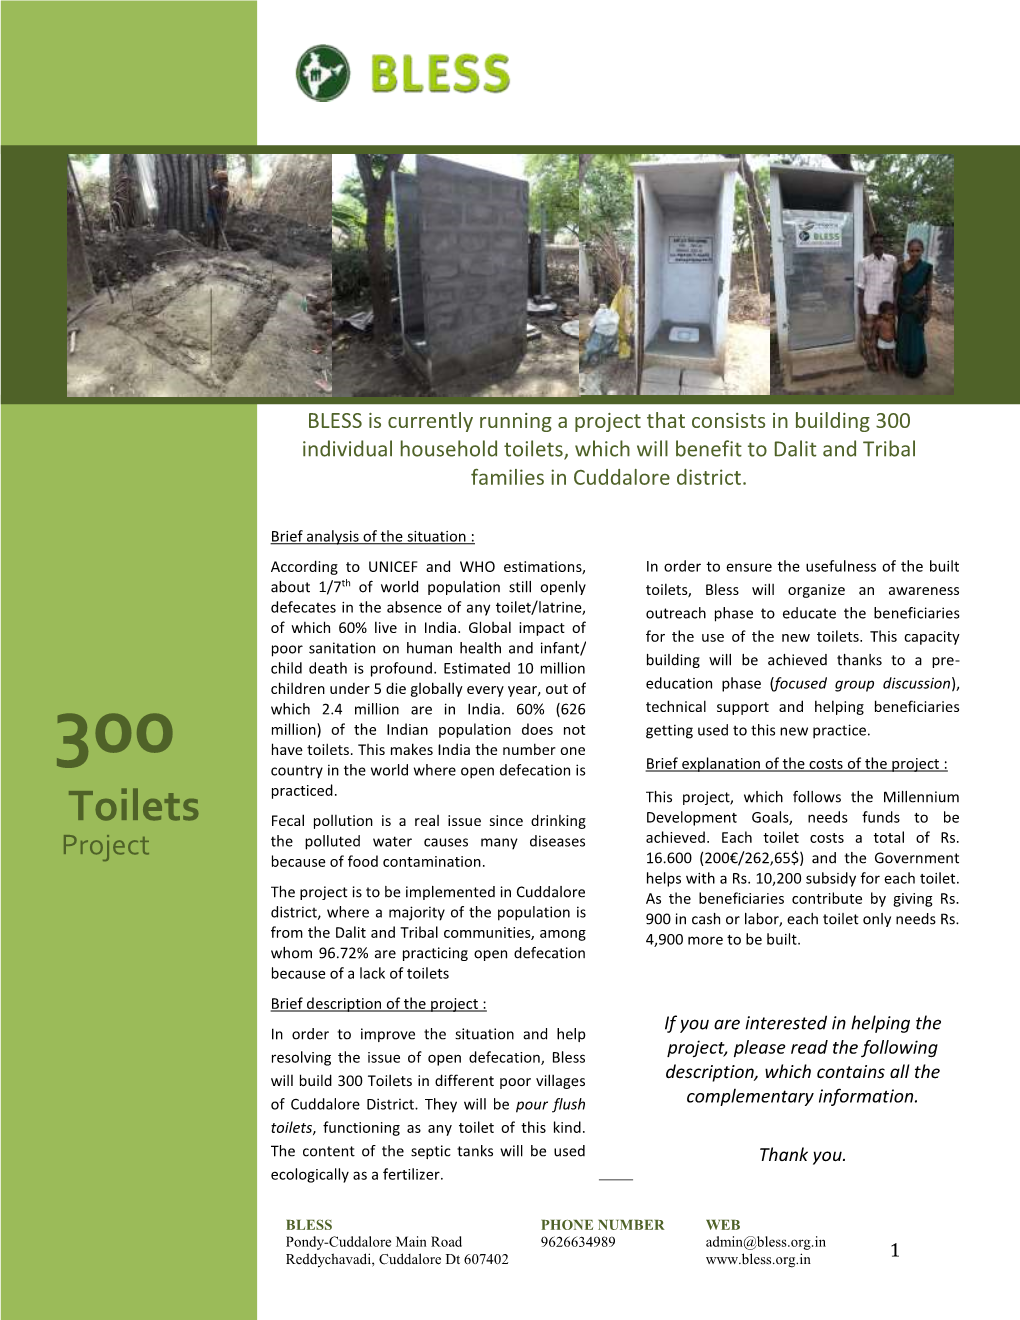 Toilets, Which Will Benefit to Dalit and Tribal Families in Cuddalore District